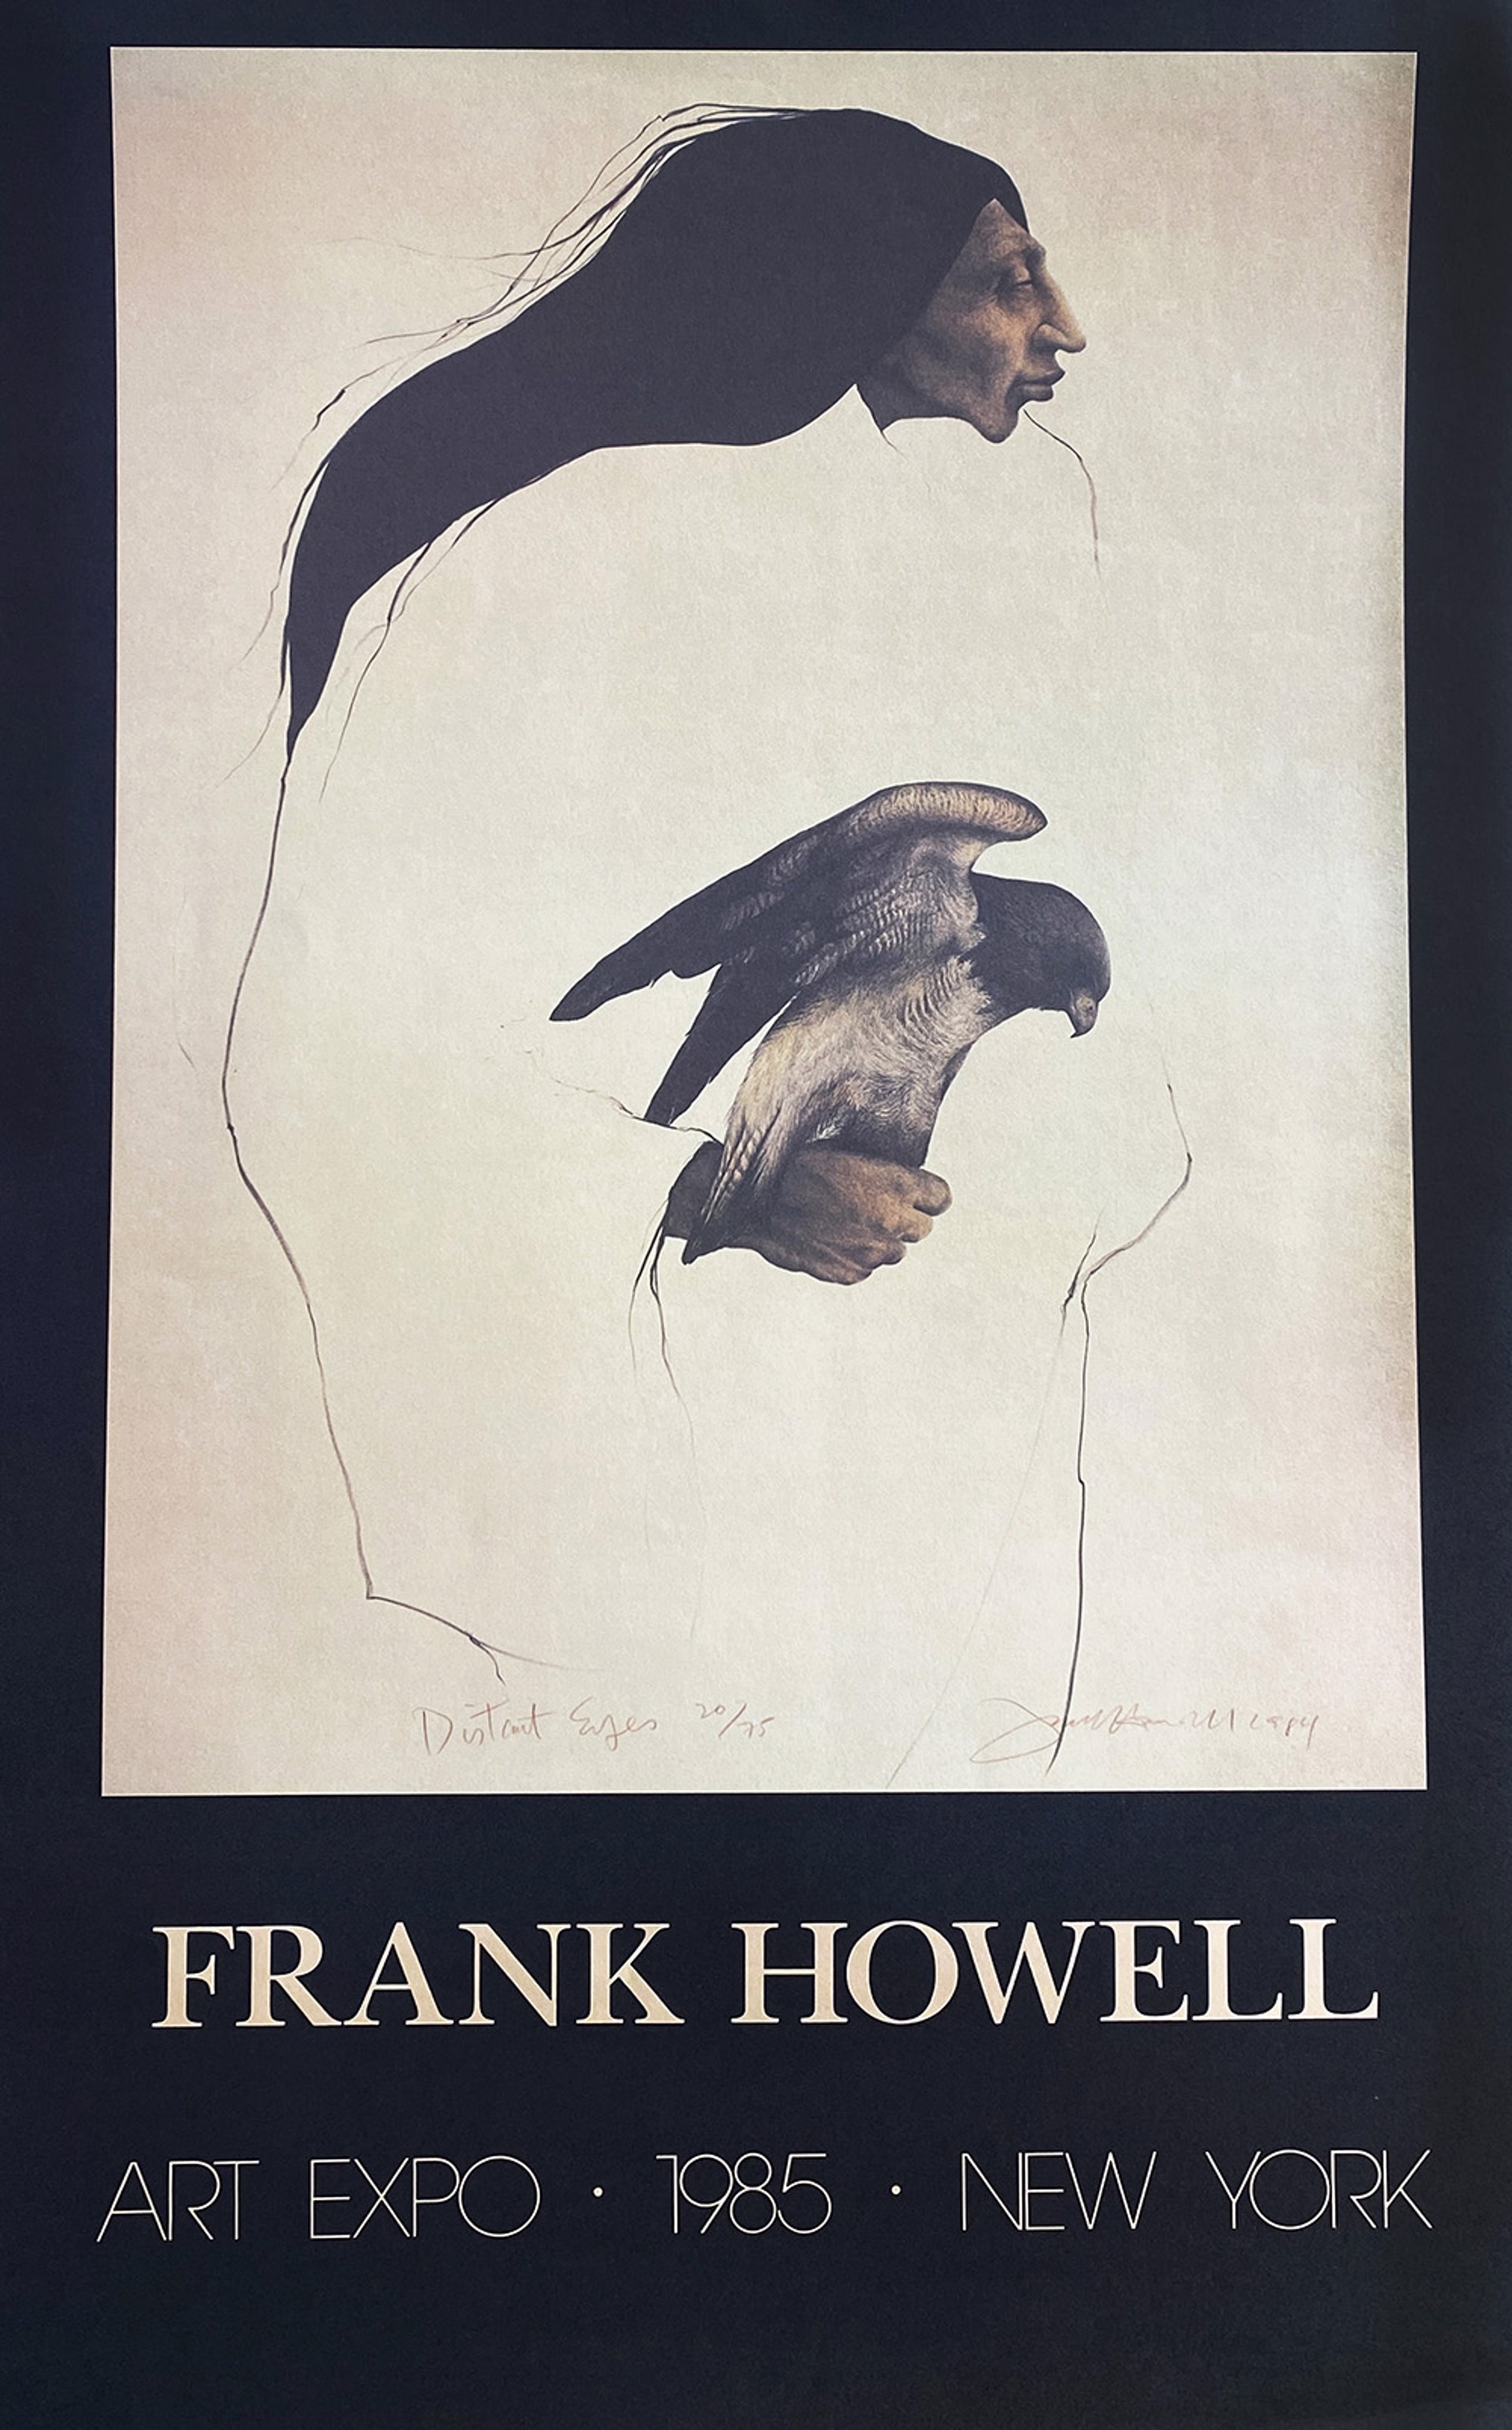 Frank Howell Art Expo Poster by Frank Howell